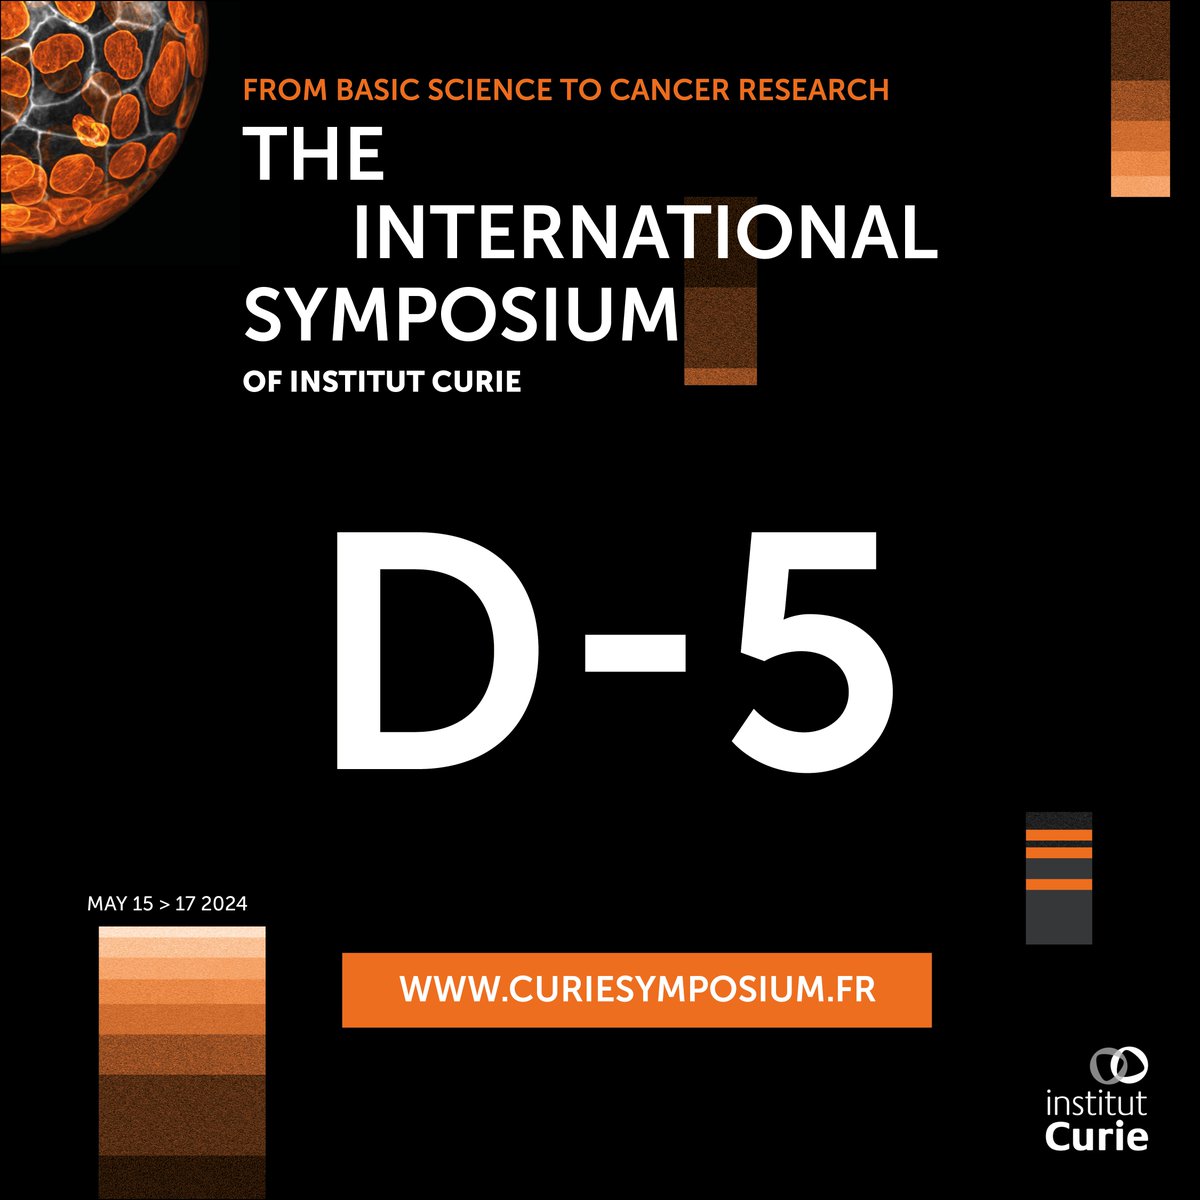 Get ready for the 1st edition of the #CurieSymposium! Take a closer look at the program and find out all about the practical informations on curiesymposium.fr